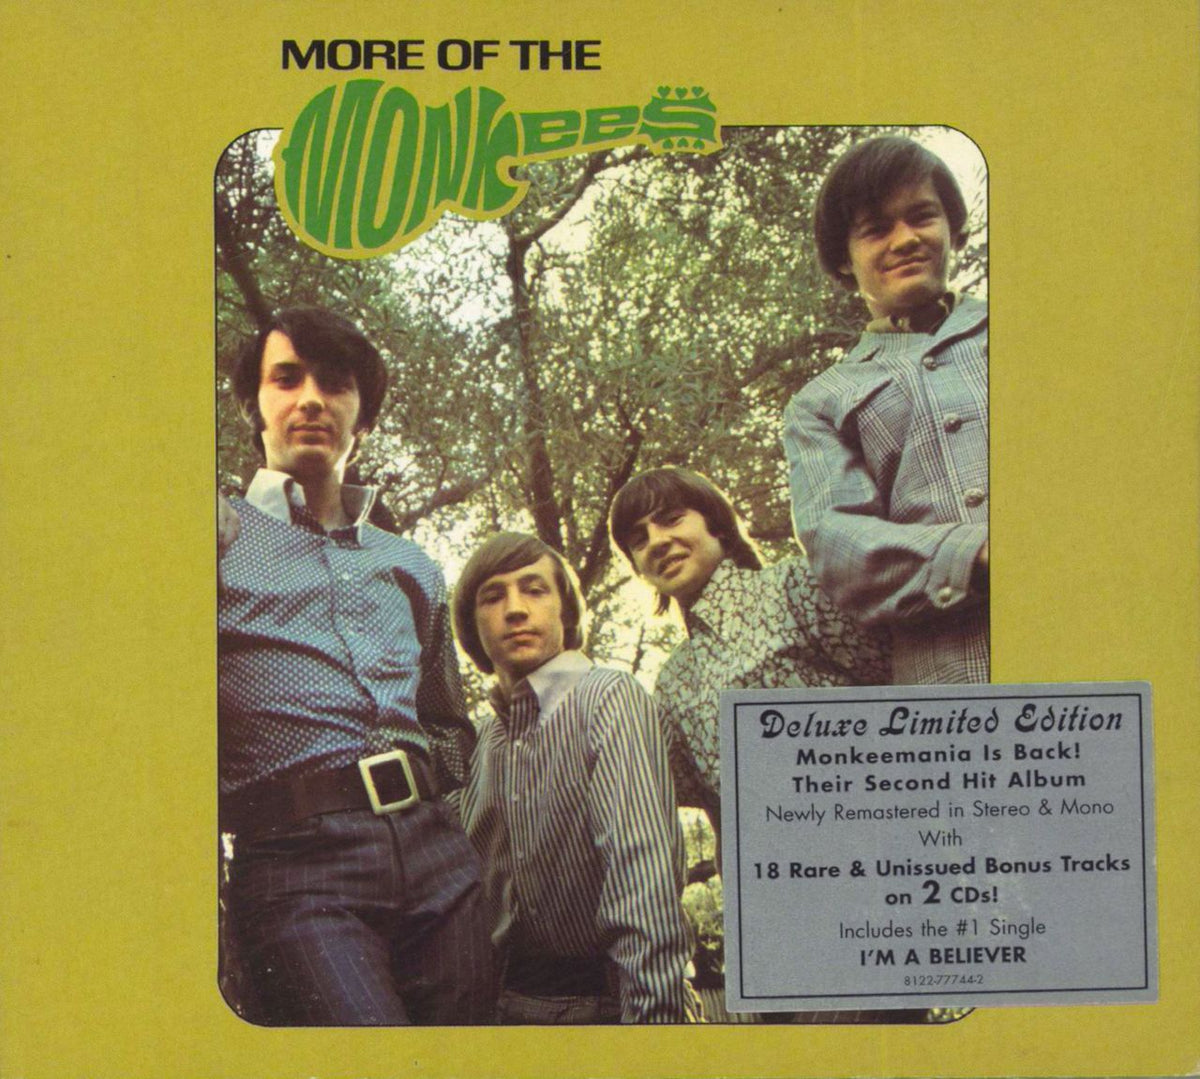 The Monkees More Of The Monkees: Deluxe Edition UK 2-CD album set —  RareVinyl.com